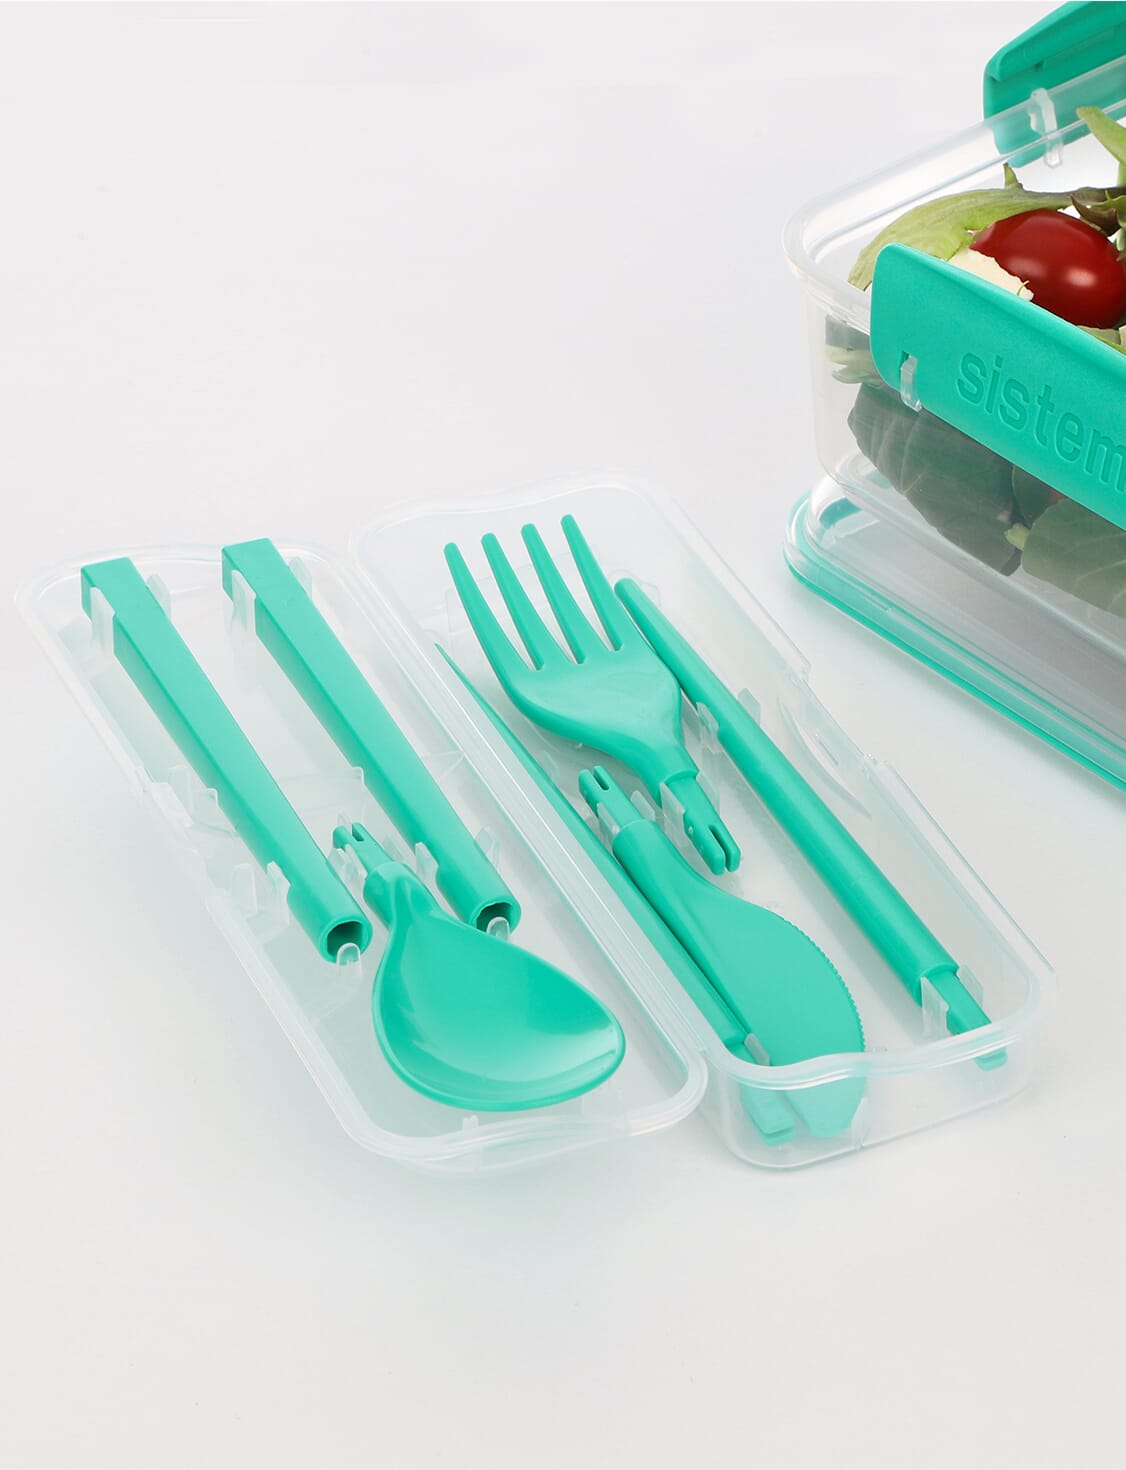 https://stergita.sirv.com/sistema/catalog/product/1/9/1917-53c_cutlery_togo_bench_food_bench_mintyteal.png?canvas.color=fcfbf8